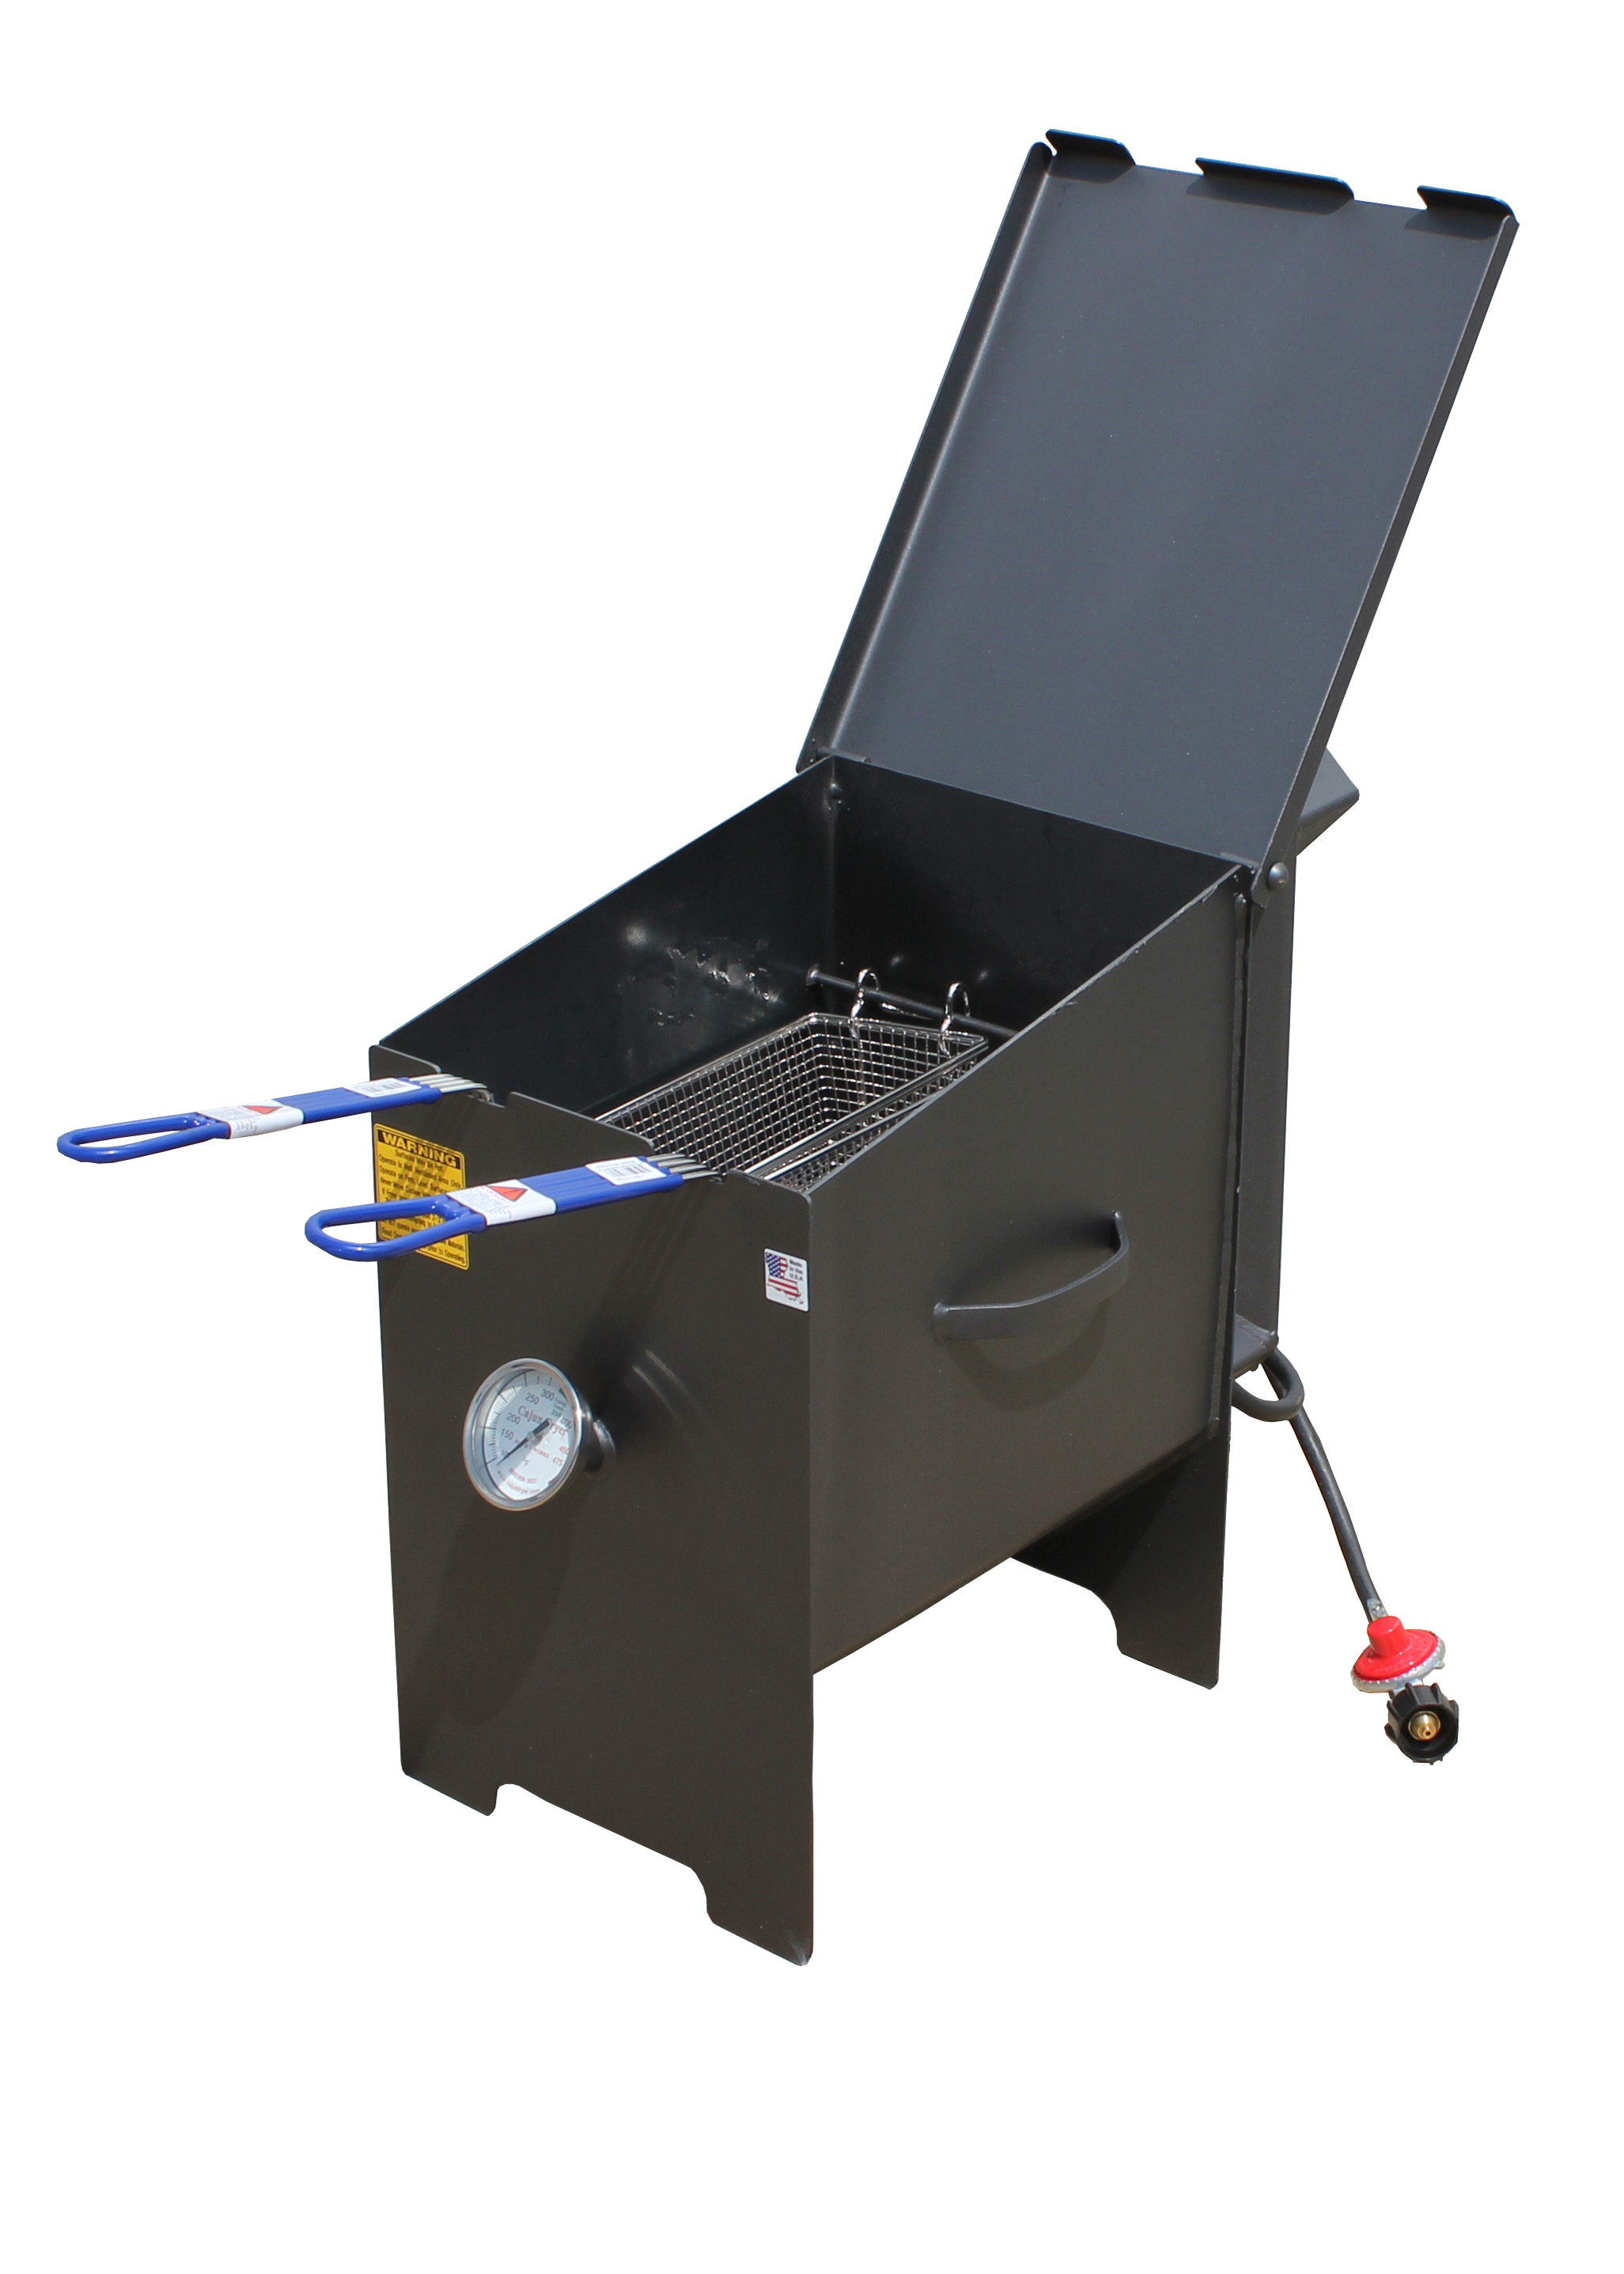 Cajun Fryer 6 Gallon Propane Gas Deep Fryer With Stand And 2 Baskets